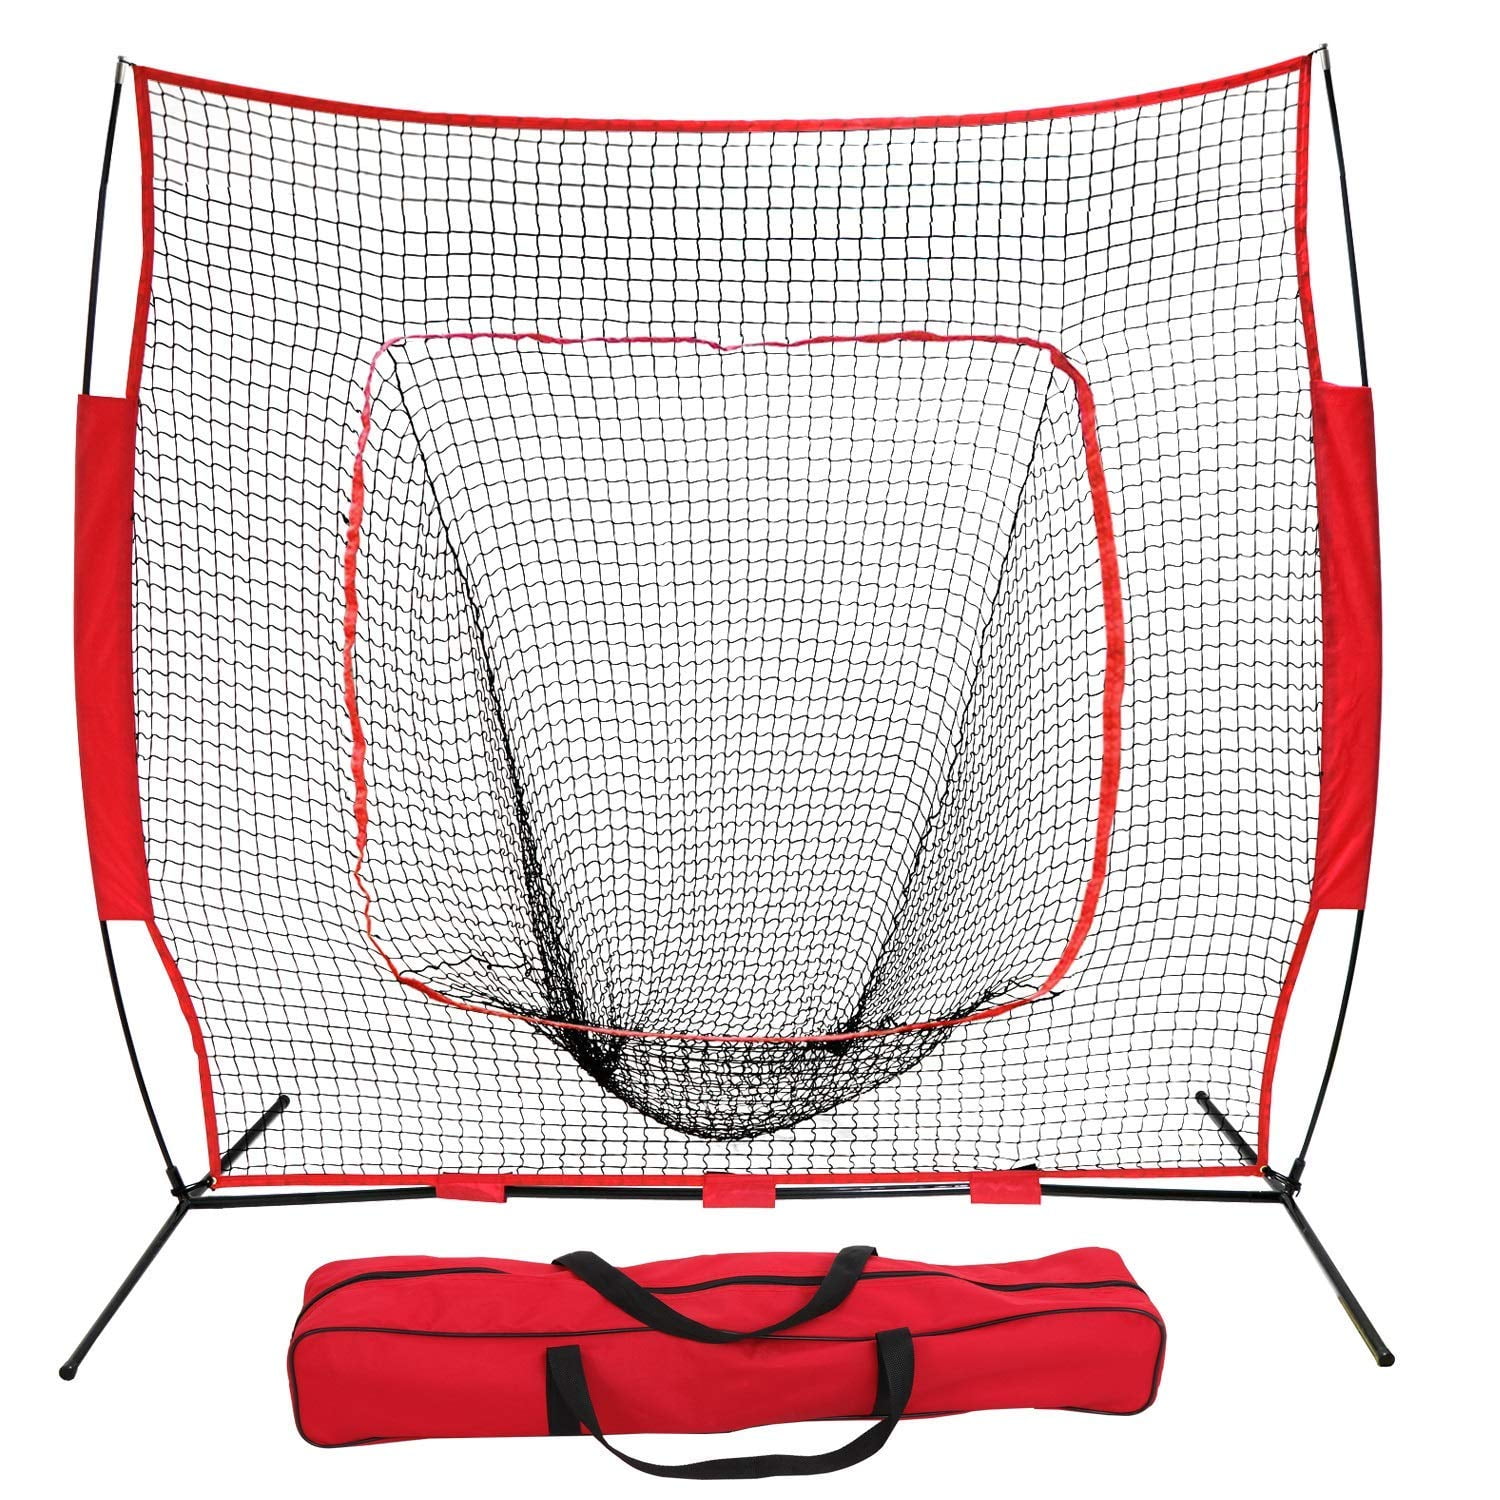 NEW Baseball Net Softball Practice for Hitting Pitching Backstop 7 x 7 Feet Red 